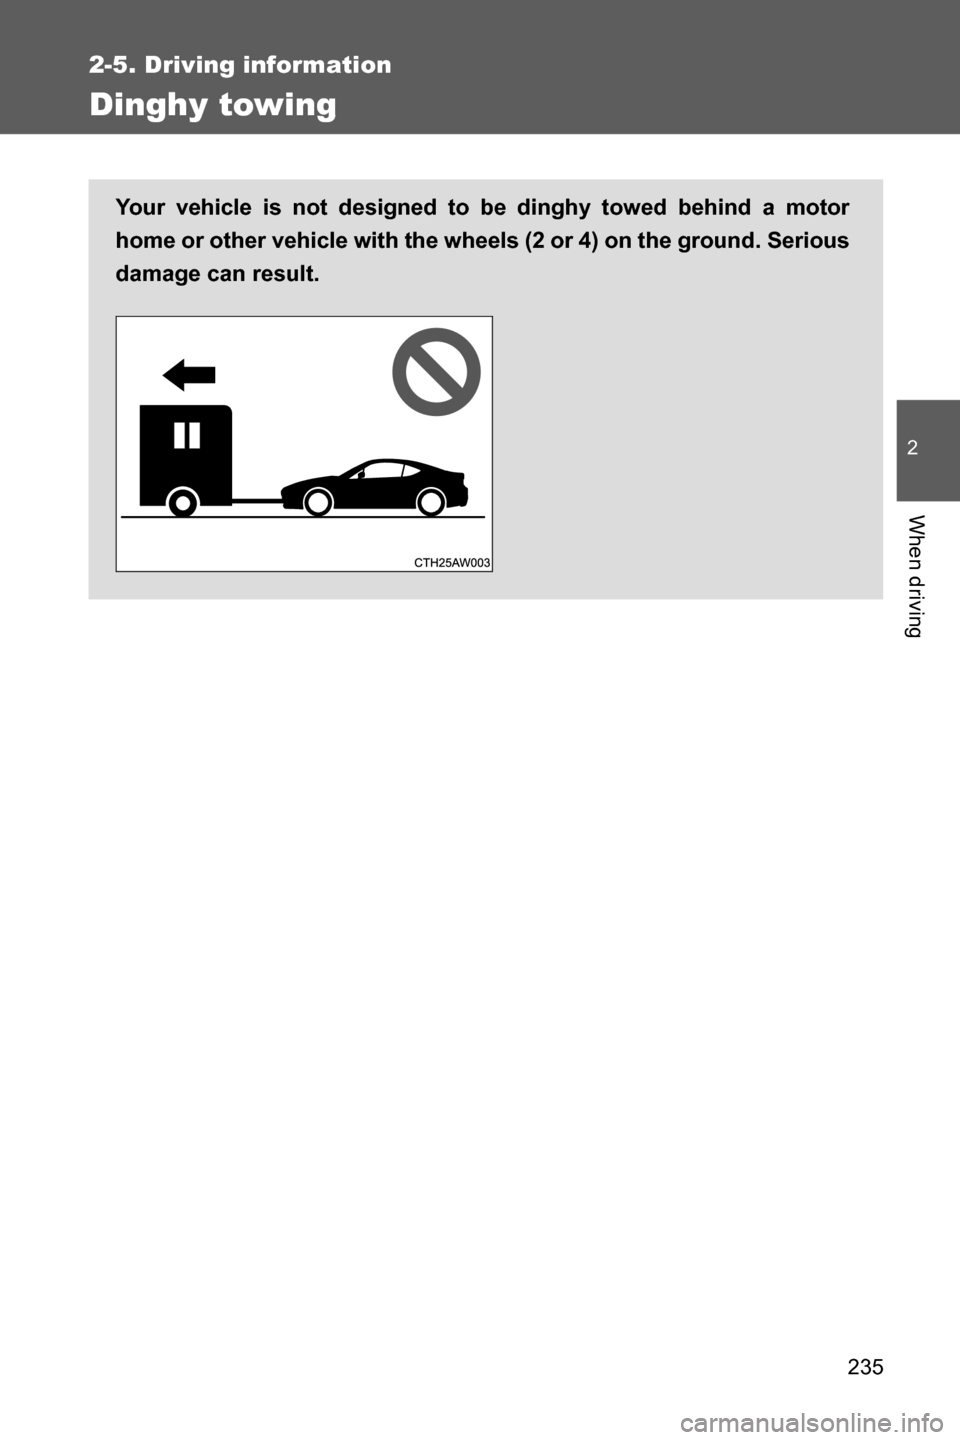 SUBARU BRZ 2016 1.G Owners Manual 235
2-5. Driving information
2
When driving
Dinghy towing
Your vehicle is not designed to be dinghy towed behind a motor
home or other vehicle with the wheels (2 or 4) on the ground. Serious
damage ca